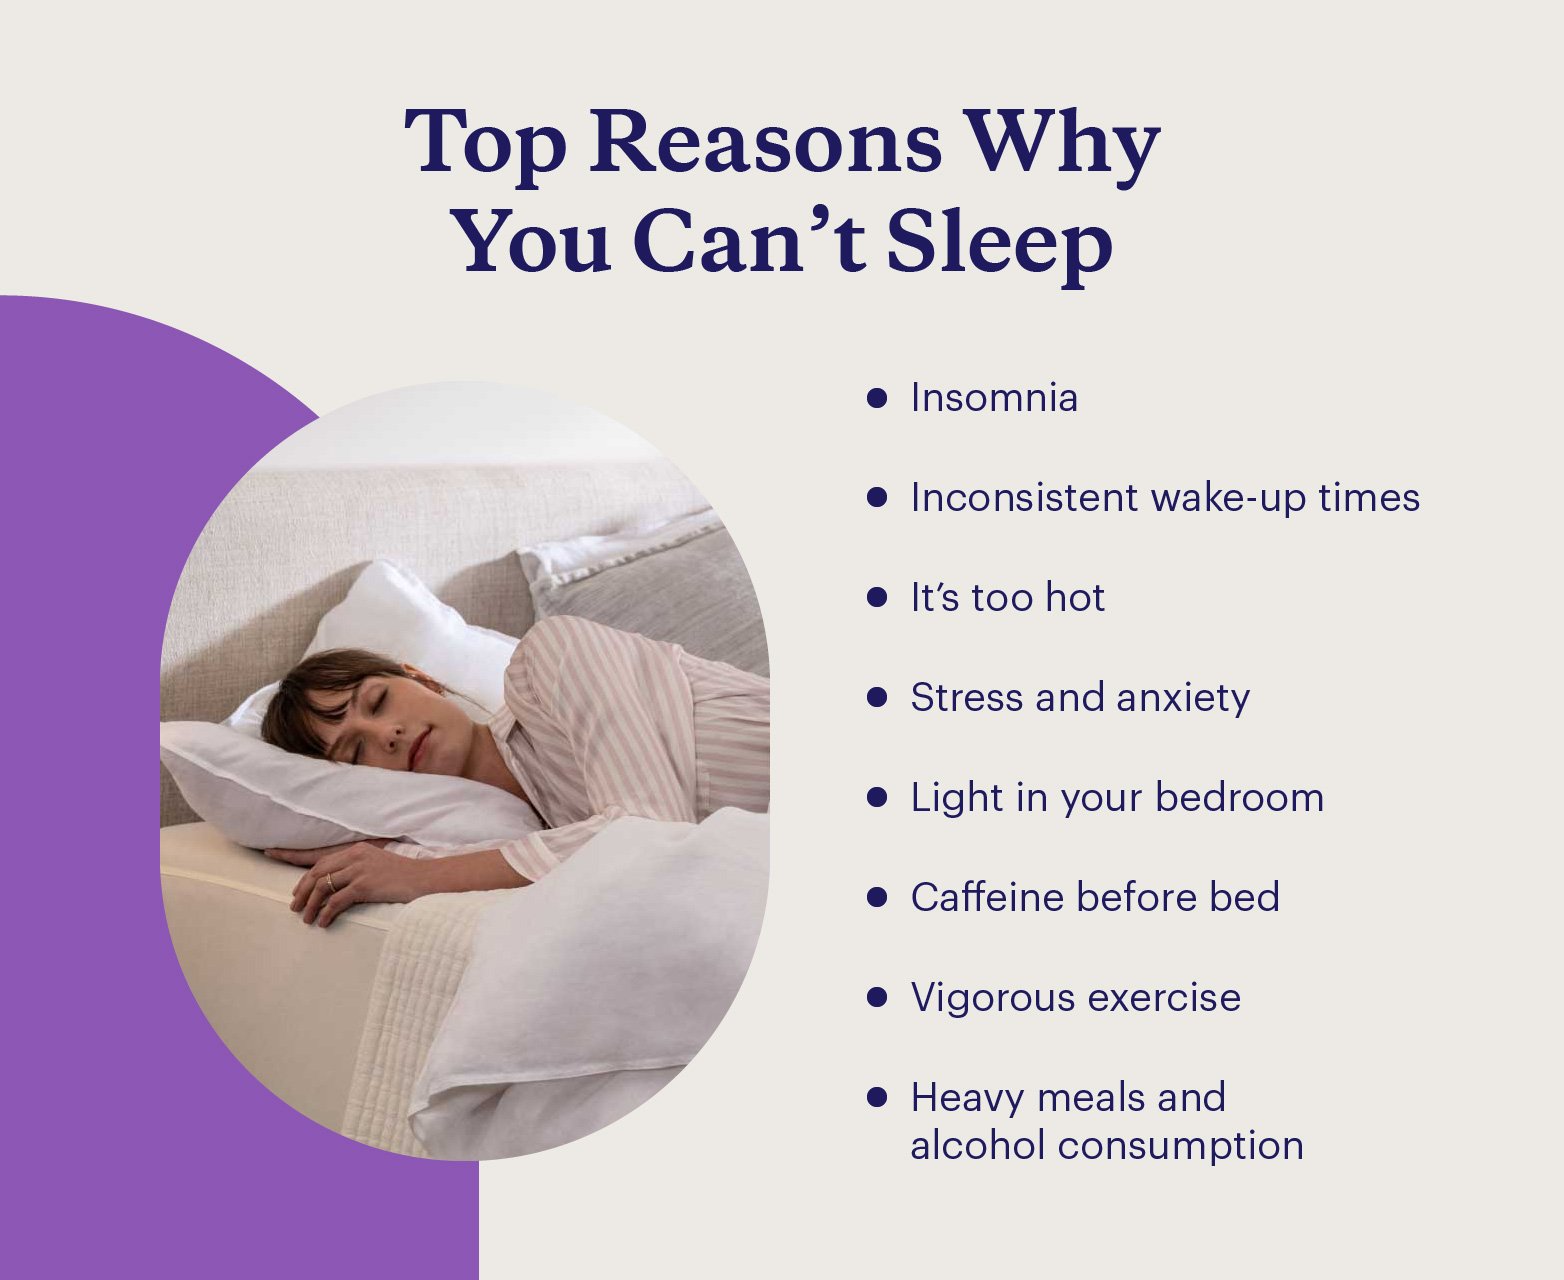 Some of the top reasons why people can’t sleep include insomnia, stress, caffeine, and alcohol consumption.